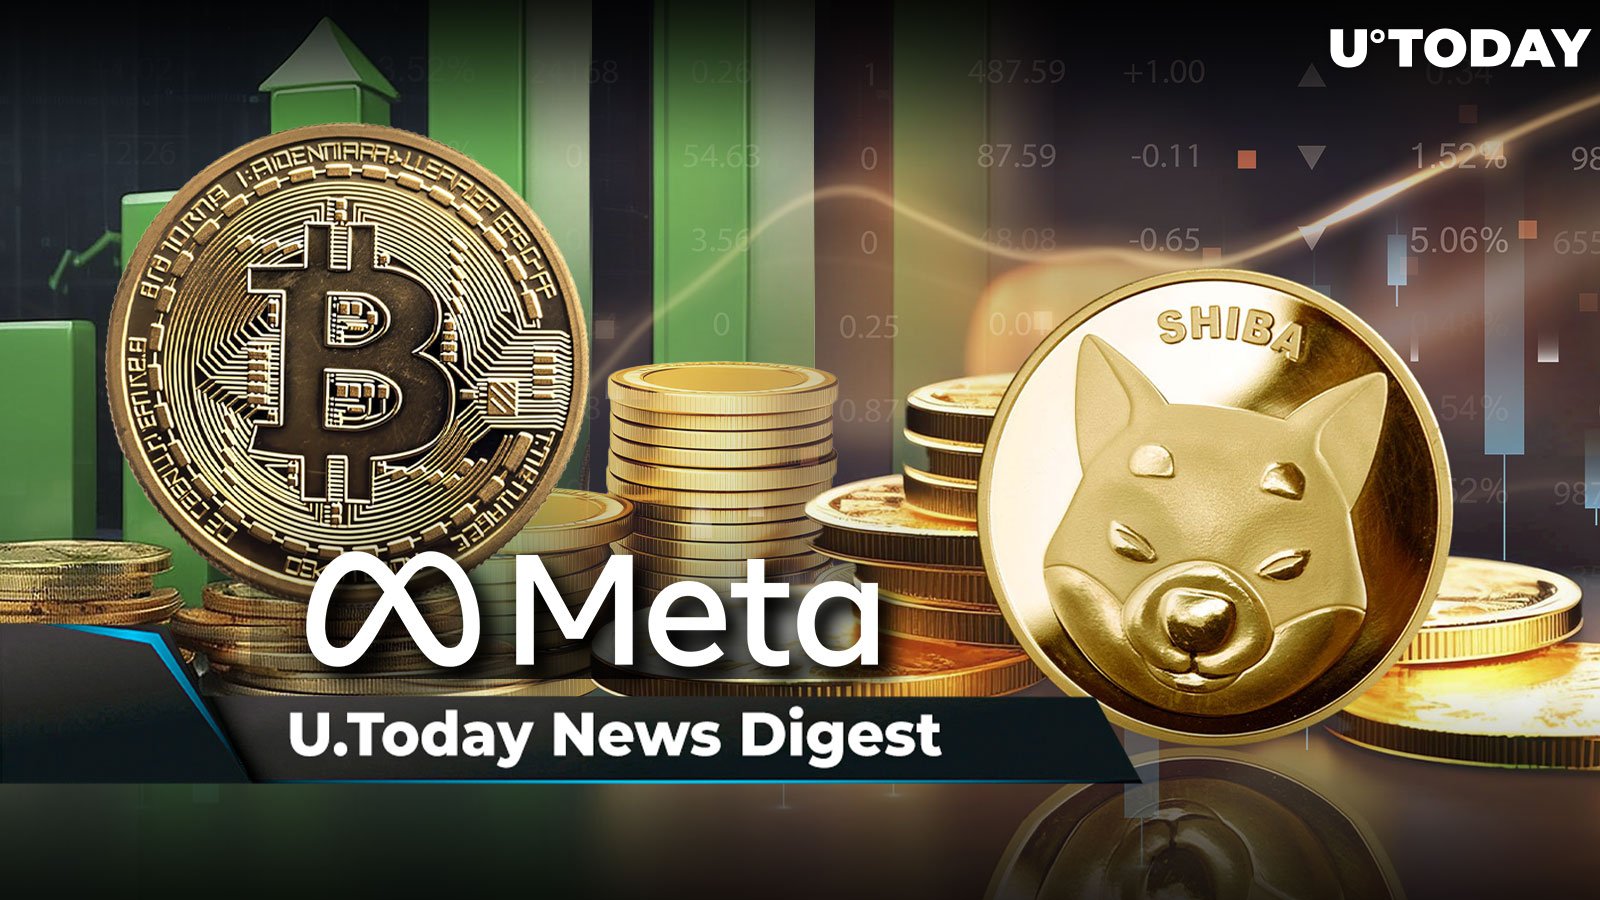 Bitcoin Overtakes Meta by Market Cap, Shiba Inu Becomes 10th Largest Crypto, New XRP Listings on Major Crypto Exchange's Horizon – U.Today's Crypto News Digest